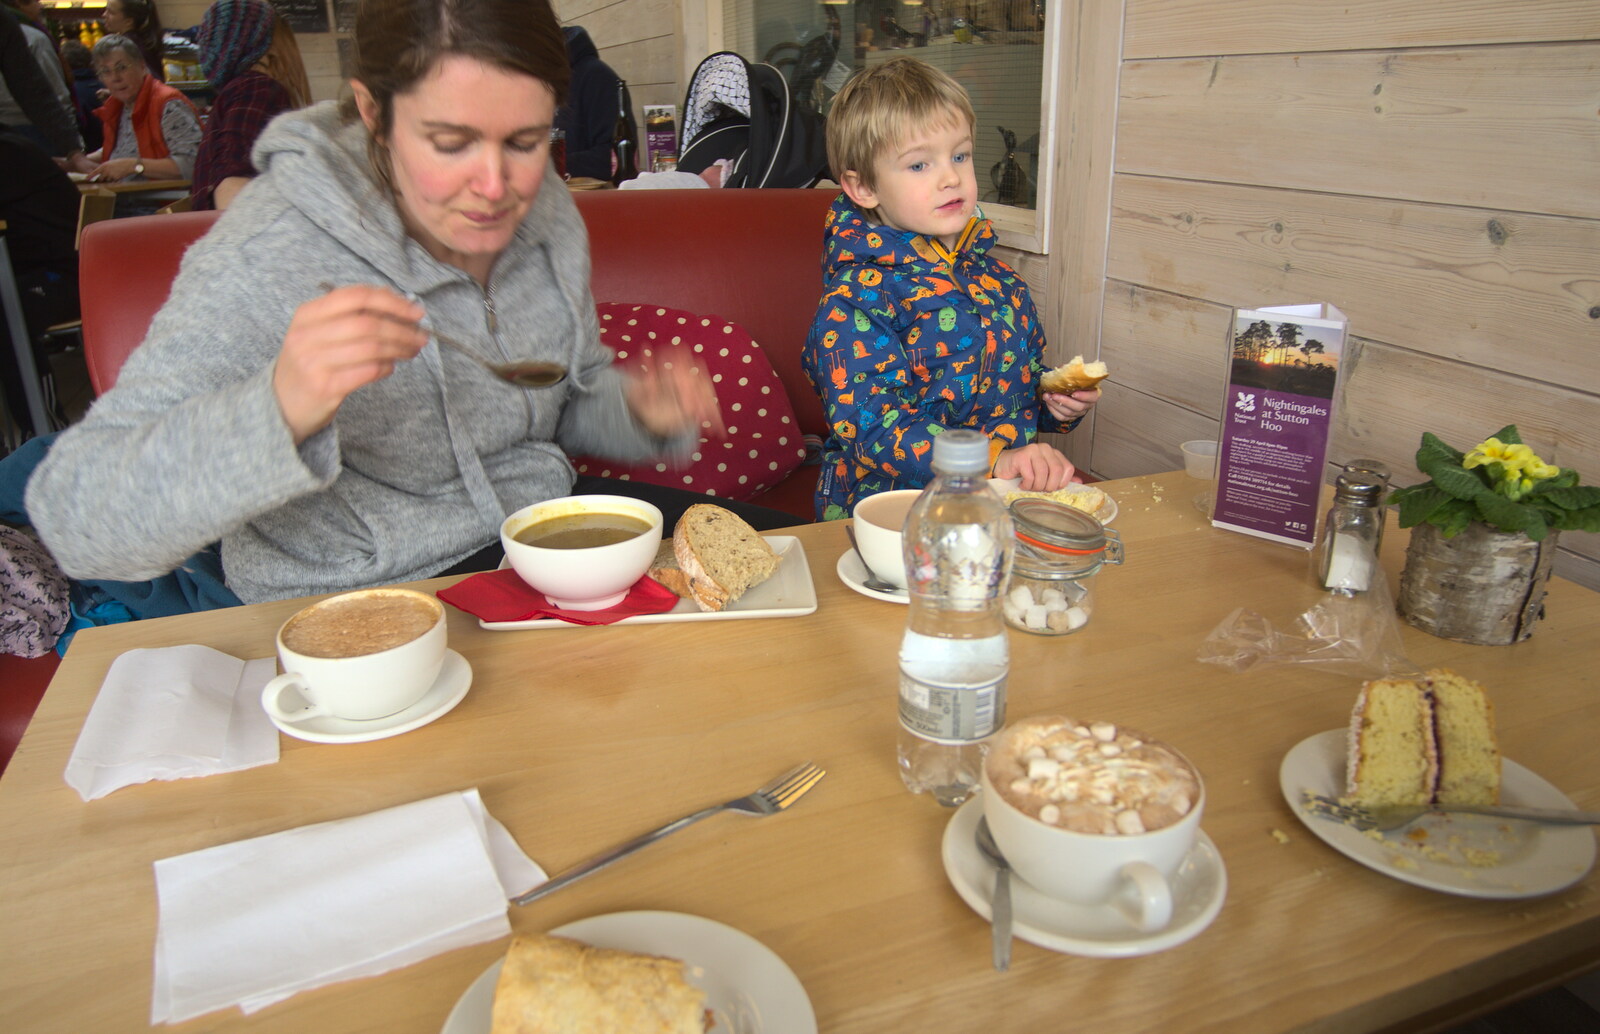 We have lunch in the National Trust café from A Trip to Sutton Hoo, Woodbridge, Suffolk - 29th January 2017